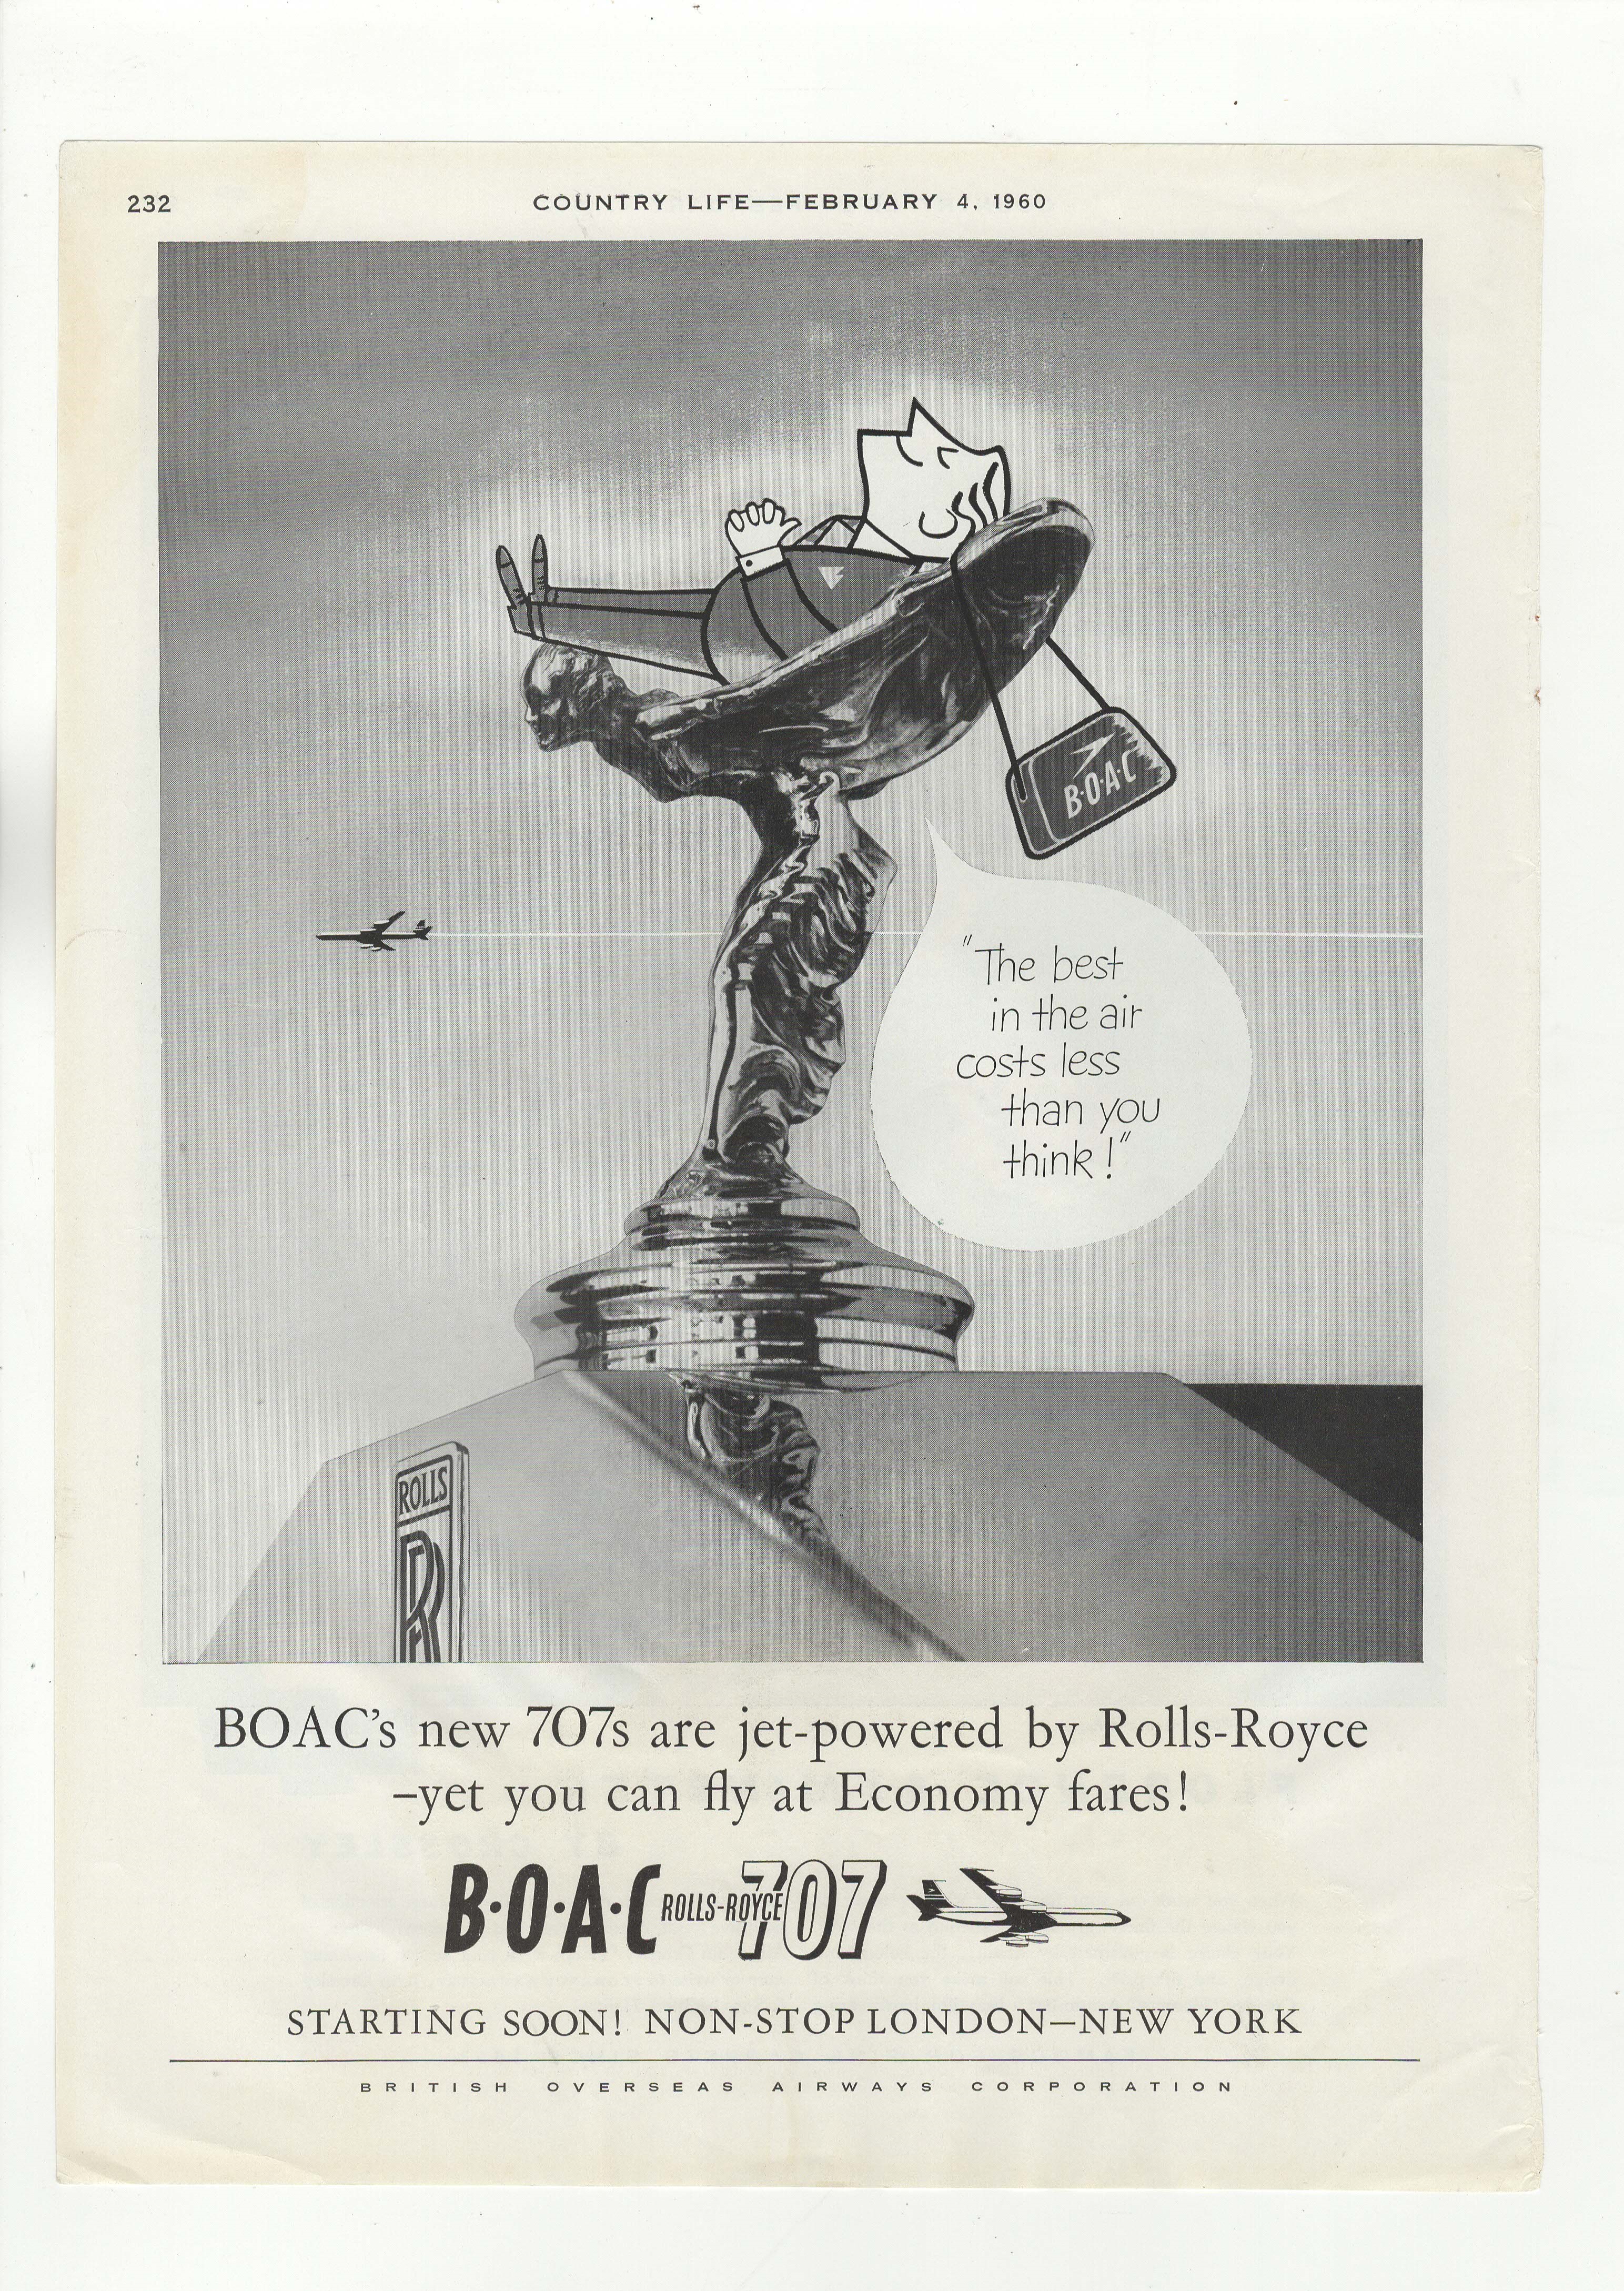 B.O.A.C.-Rolls Royce 707-1960-full page black and white advertisement